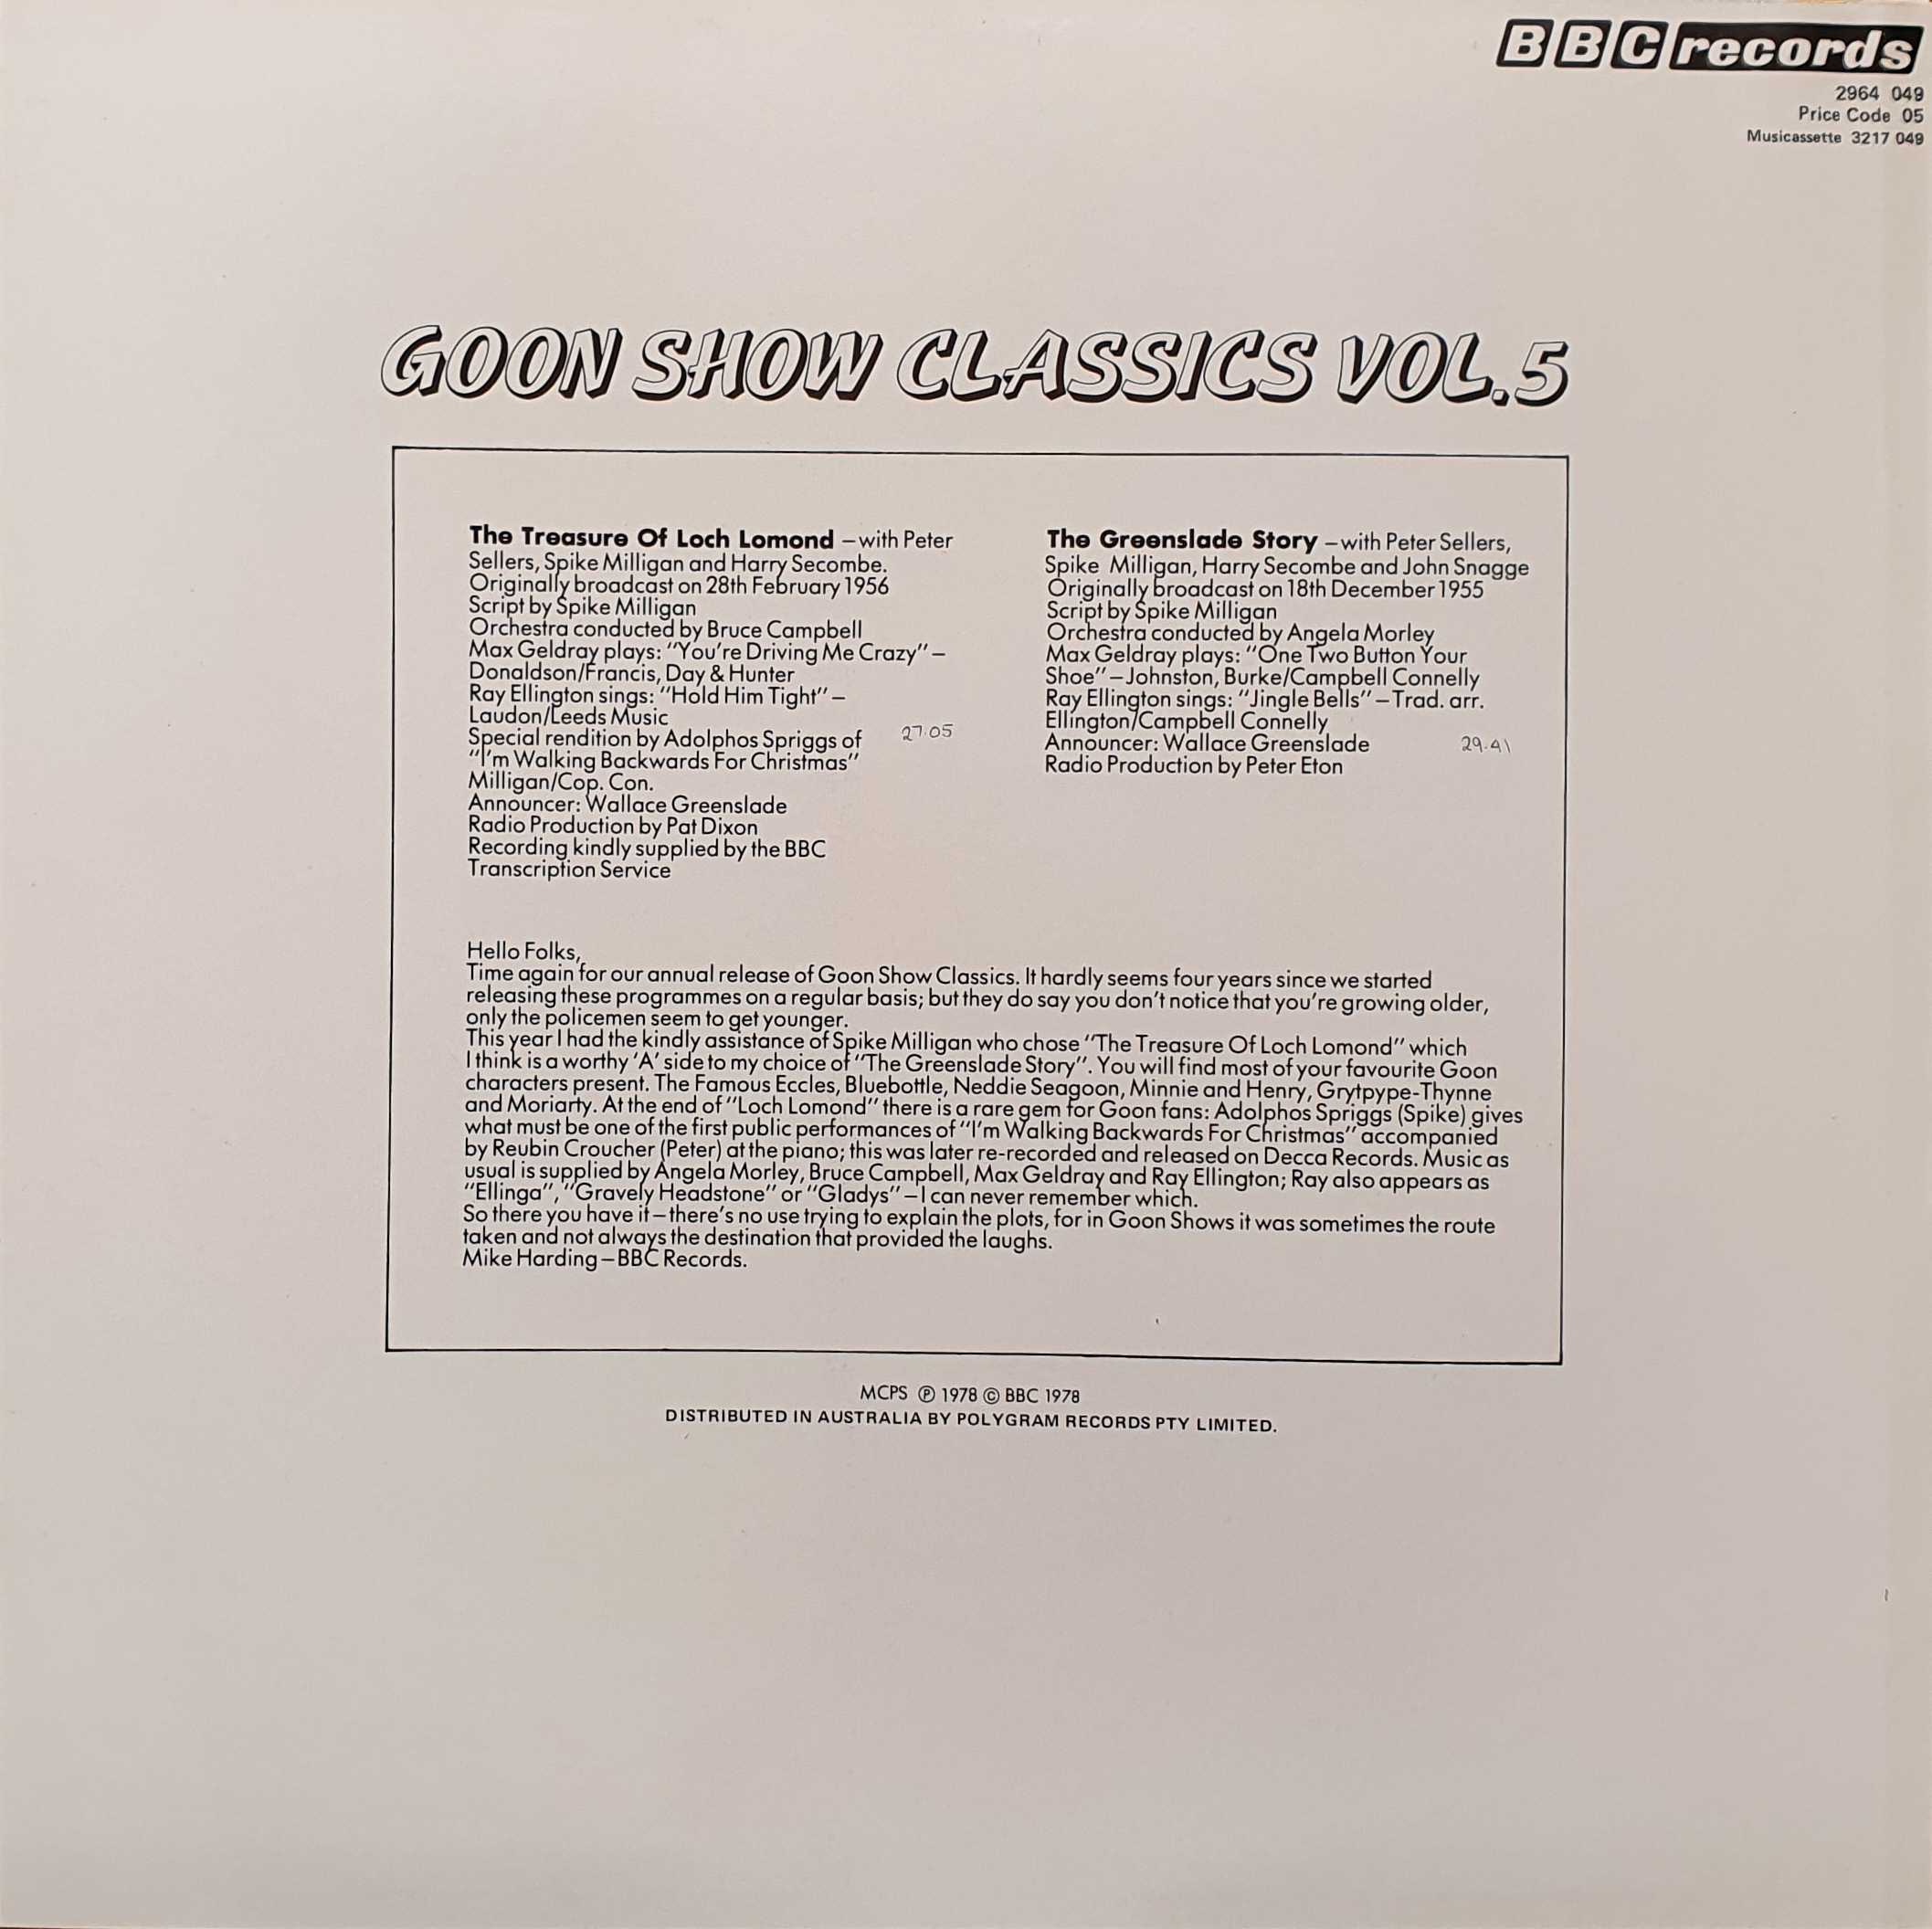 Picture of 2964 049 Goon Show classics vol. 5 by artist The Goon Show from the BBC records and Tapes library